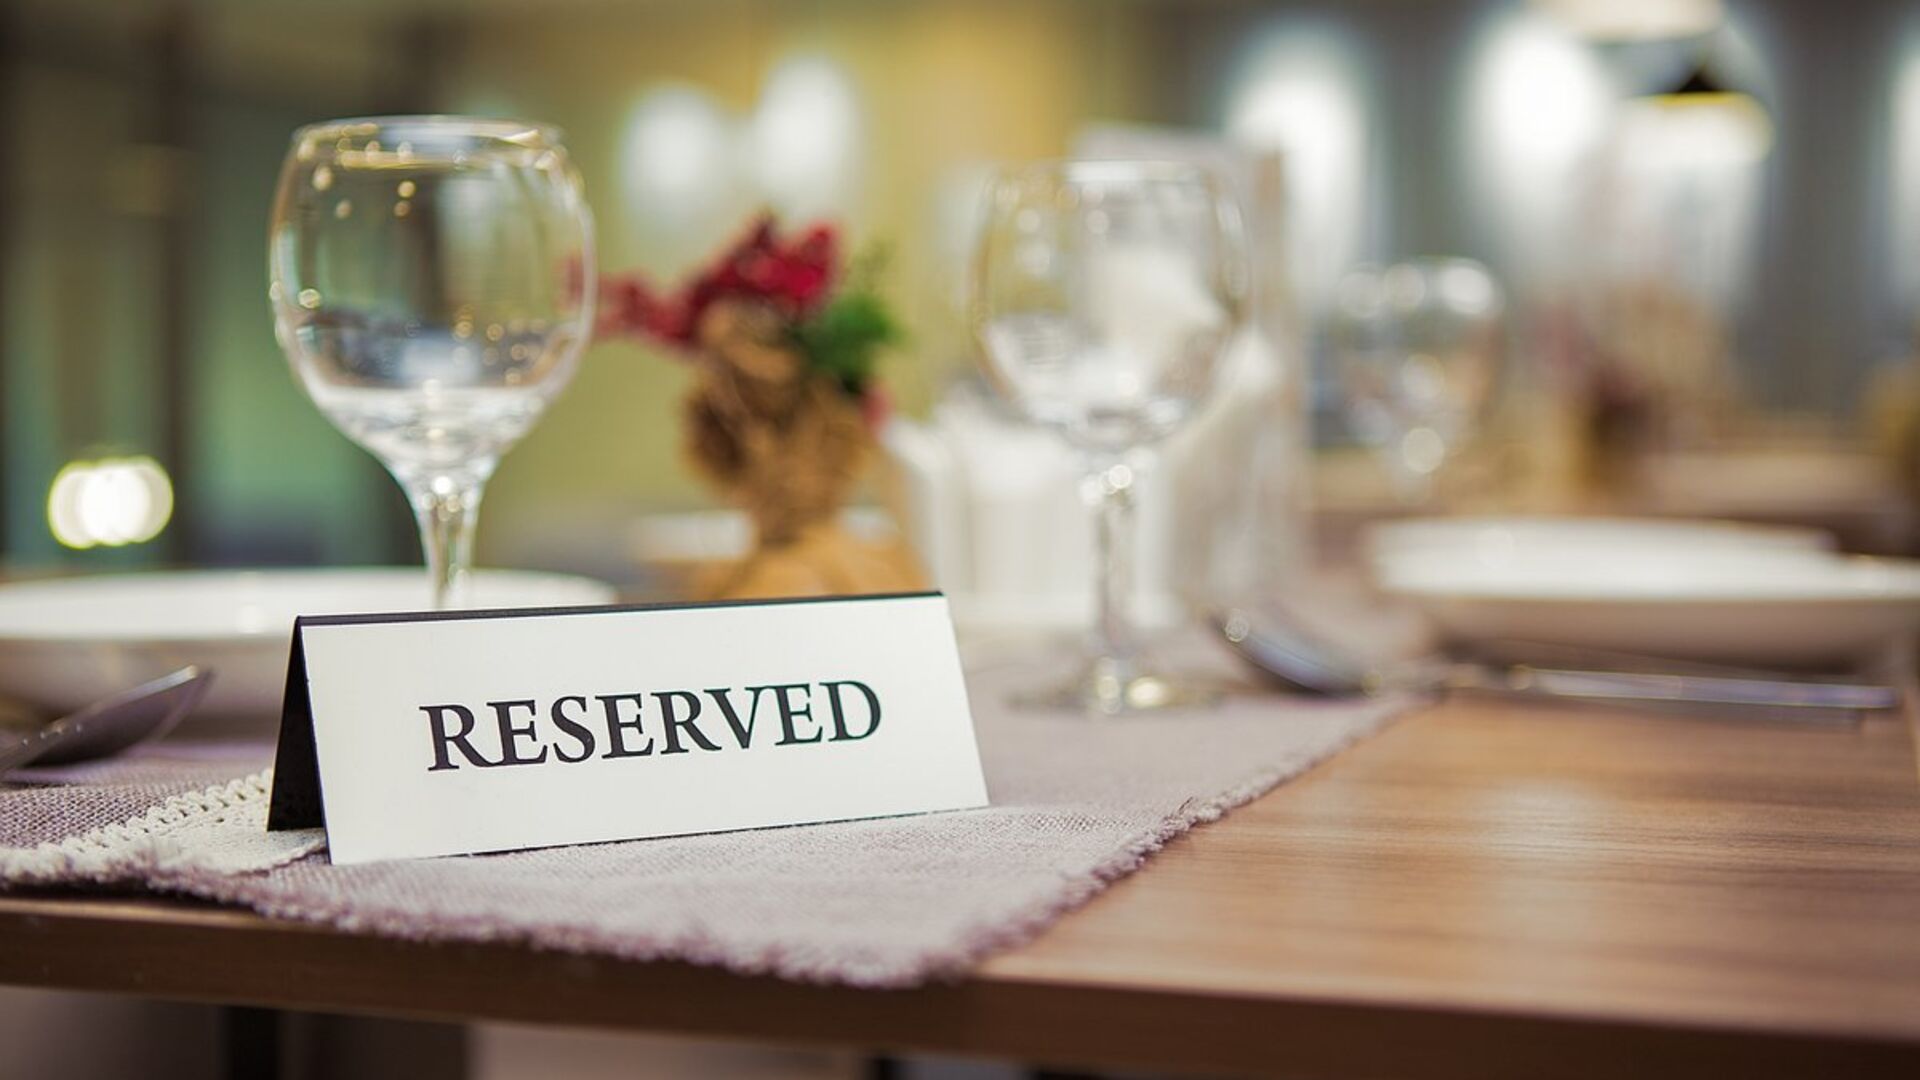 Reserved on the Table